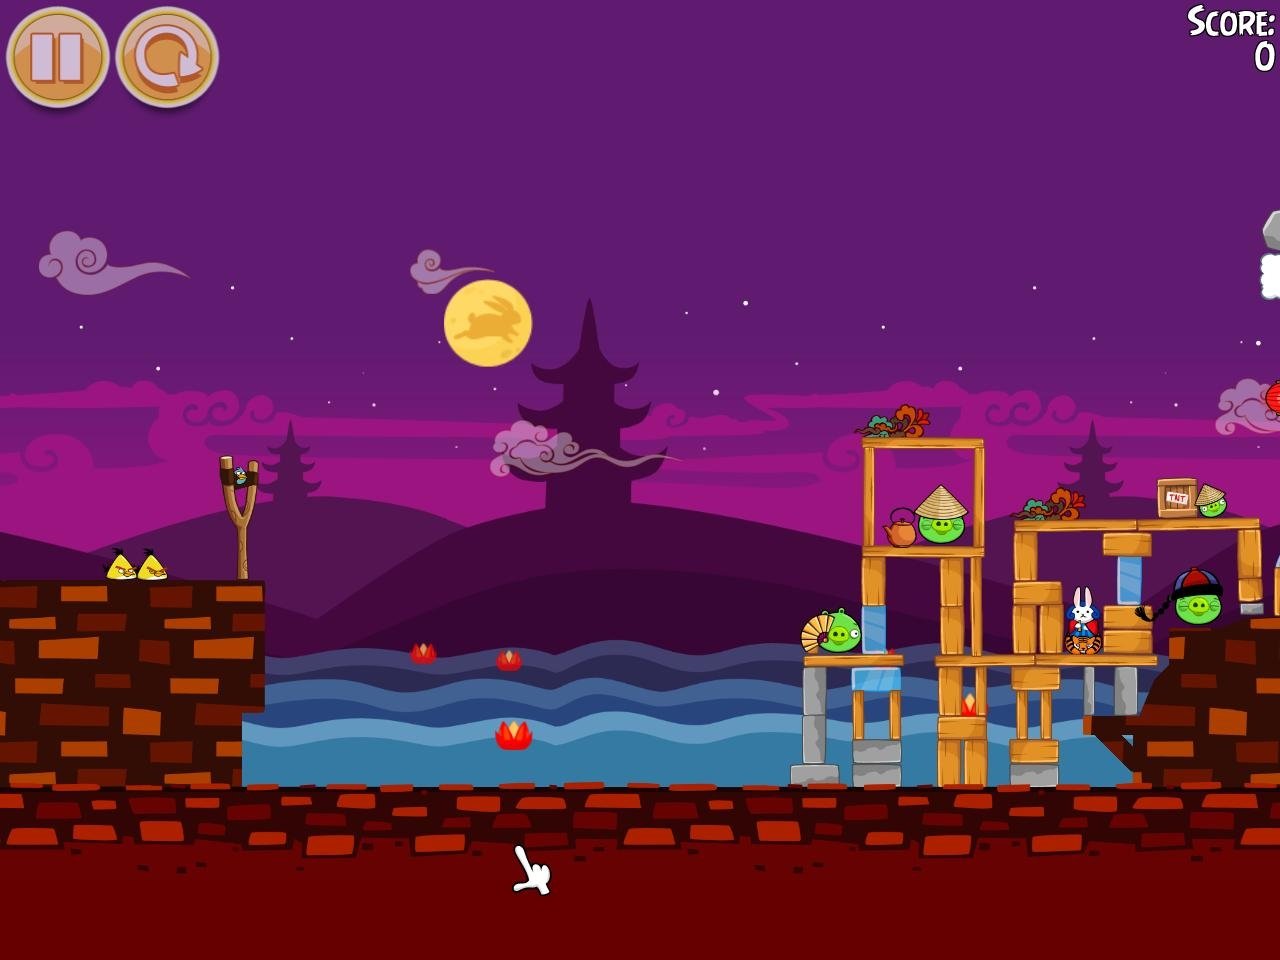 Angry Birds Download Free for Windows 10, 7, 8 (64 bit / 32 bit)